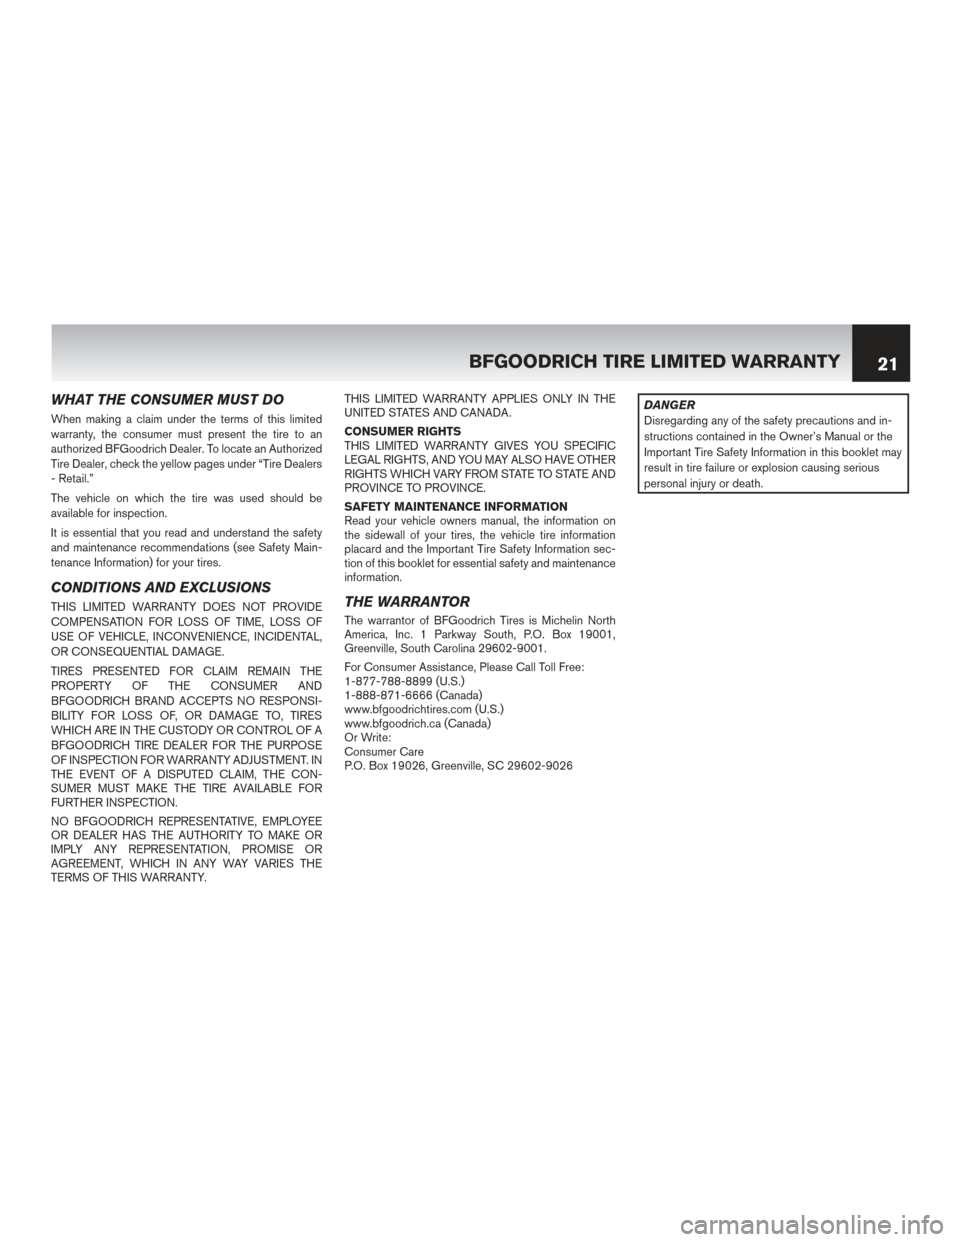 NISSAN TITAN 2014 1.G Warranty Booklet WHAT THE CONSUMER MUST DO
When making a claim under the terms of this limited
warranty, the consumer must present the tire to an
authorized BFGoodrich Dealer. To locate an Authorized
Tire Dealer, chec